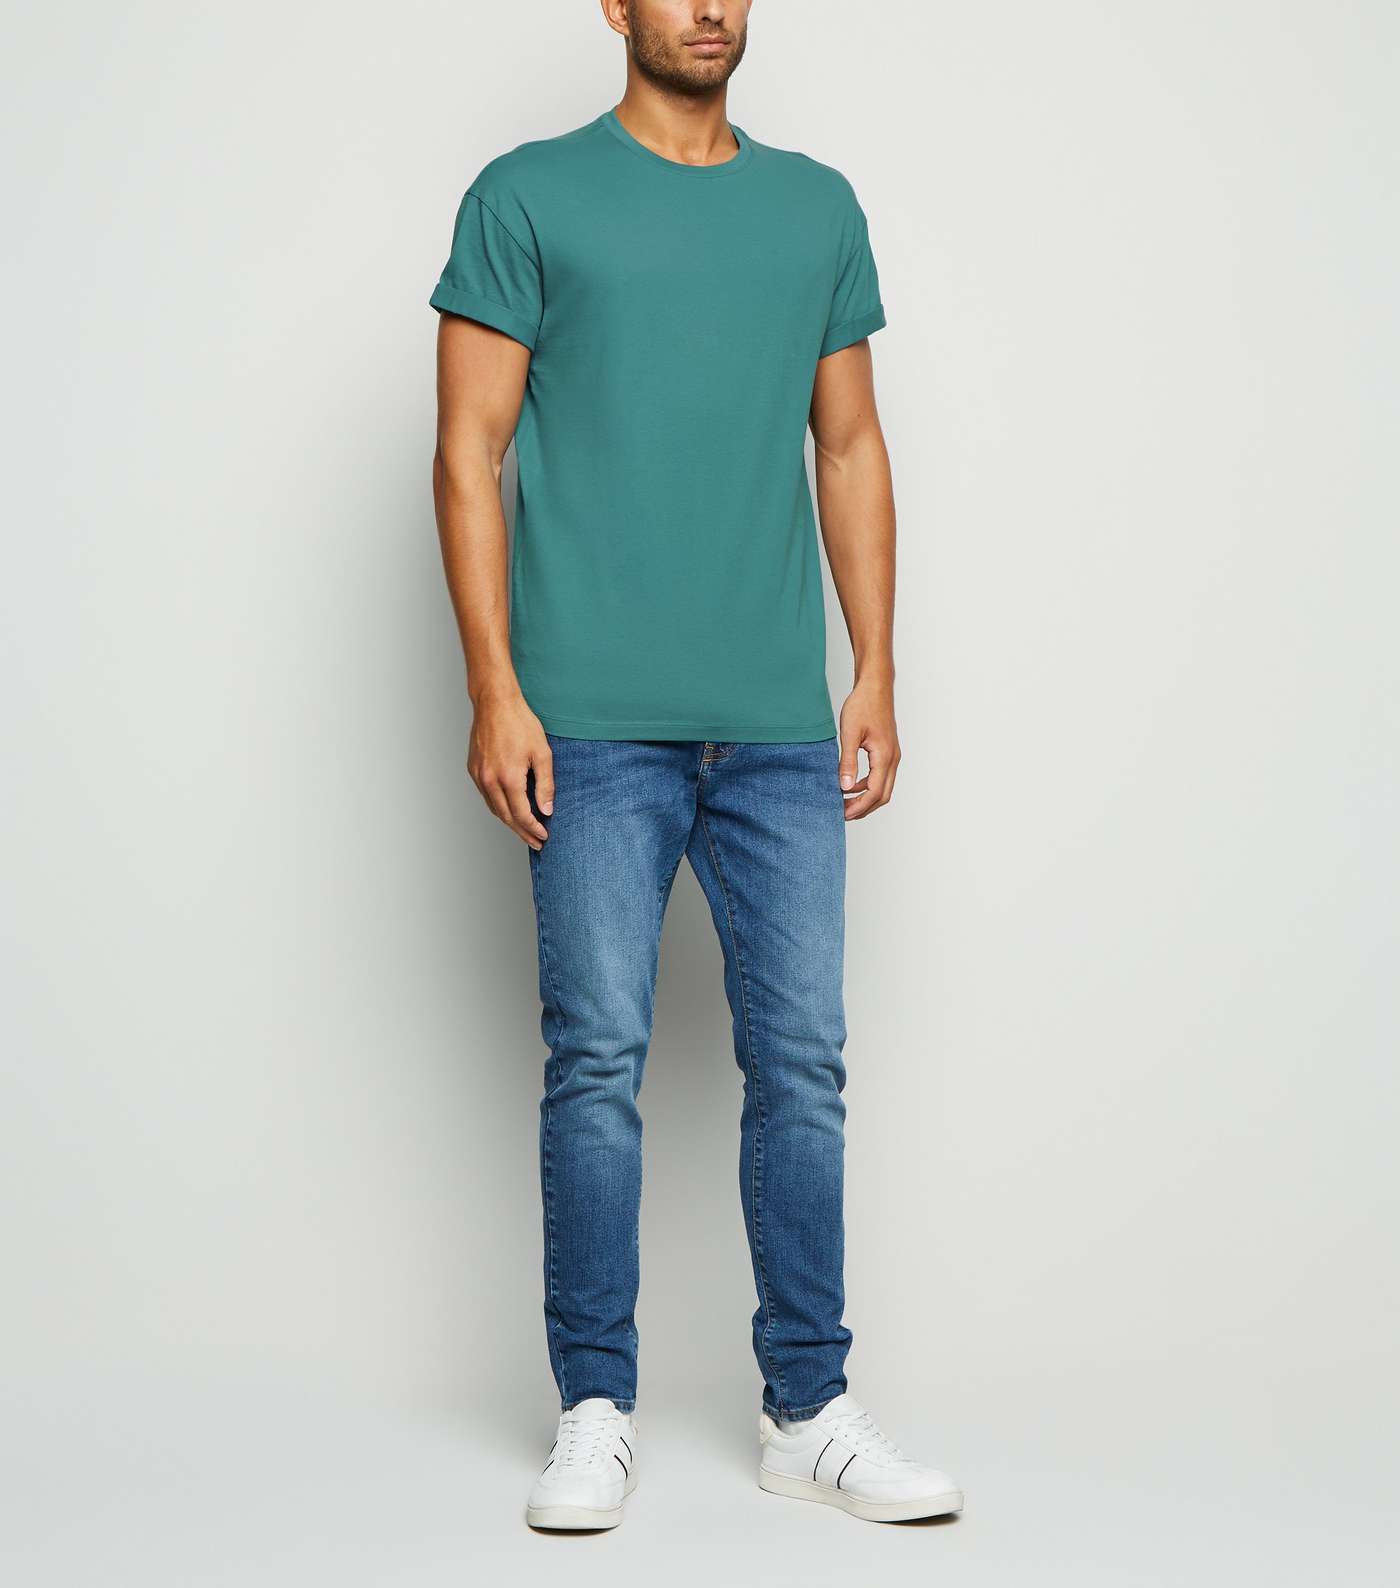 Teal Cotton Short Roll Sleeve T-Shirt Image 2